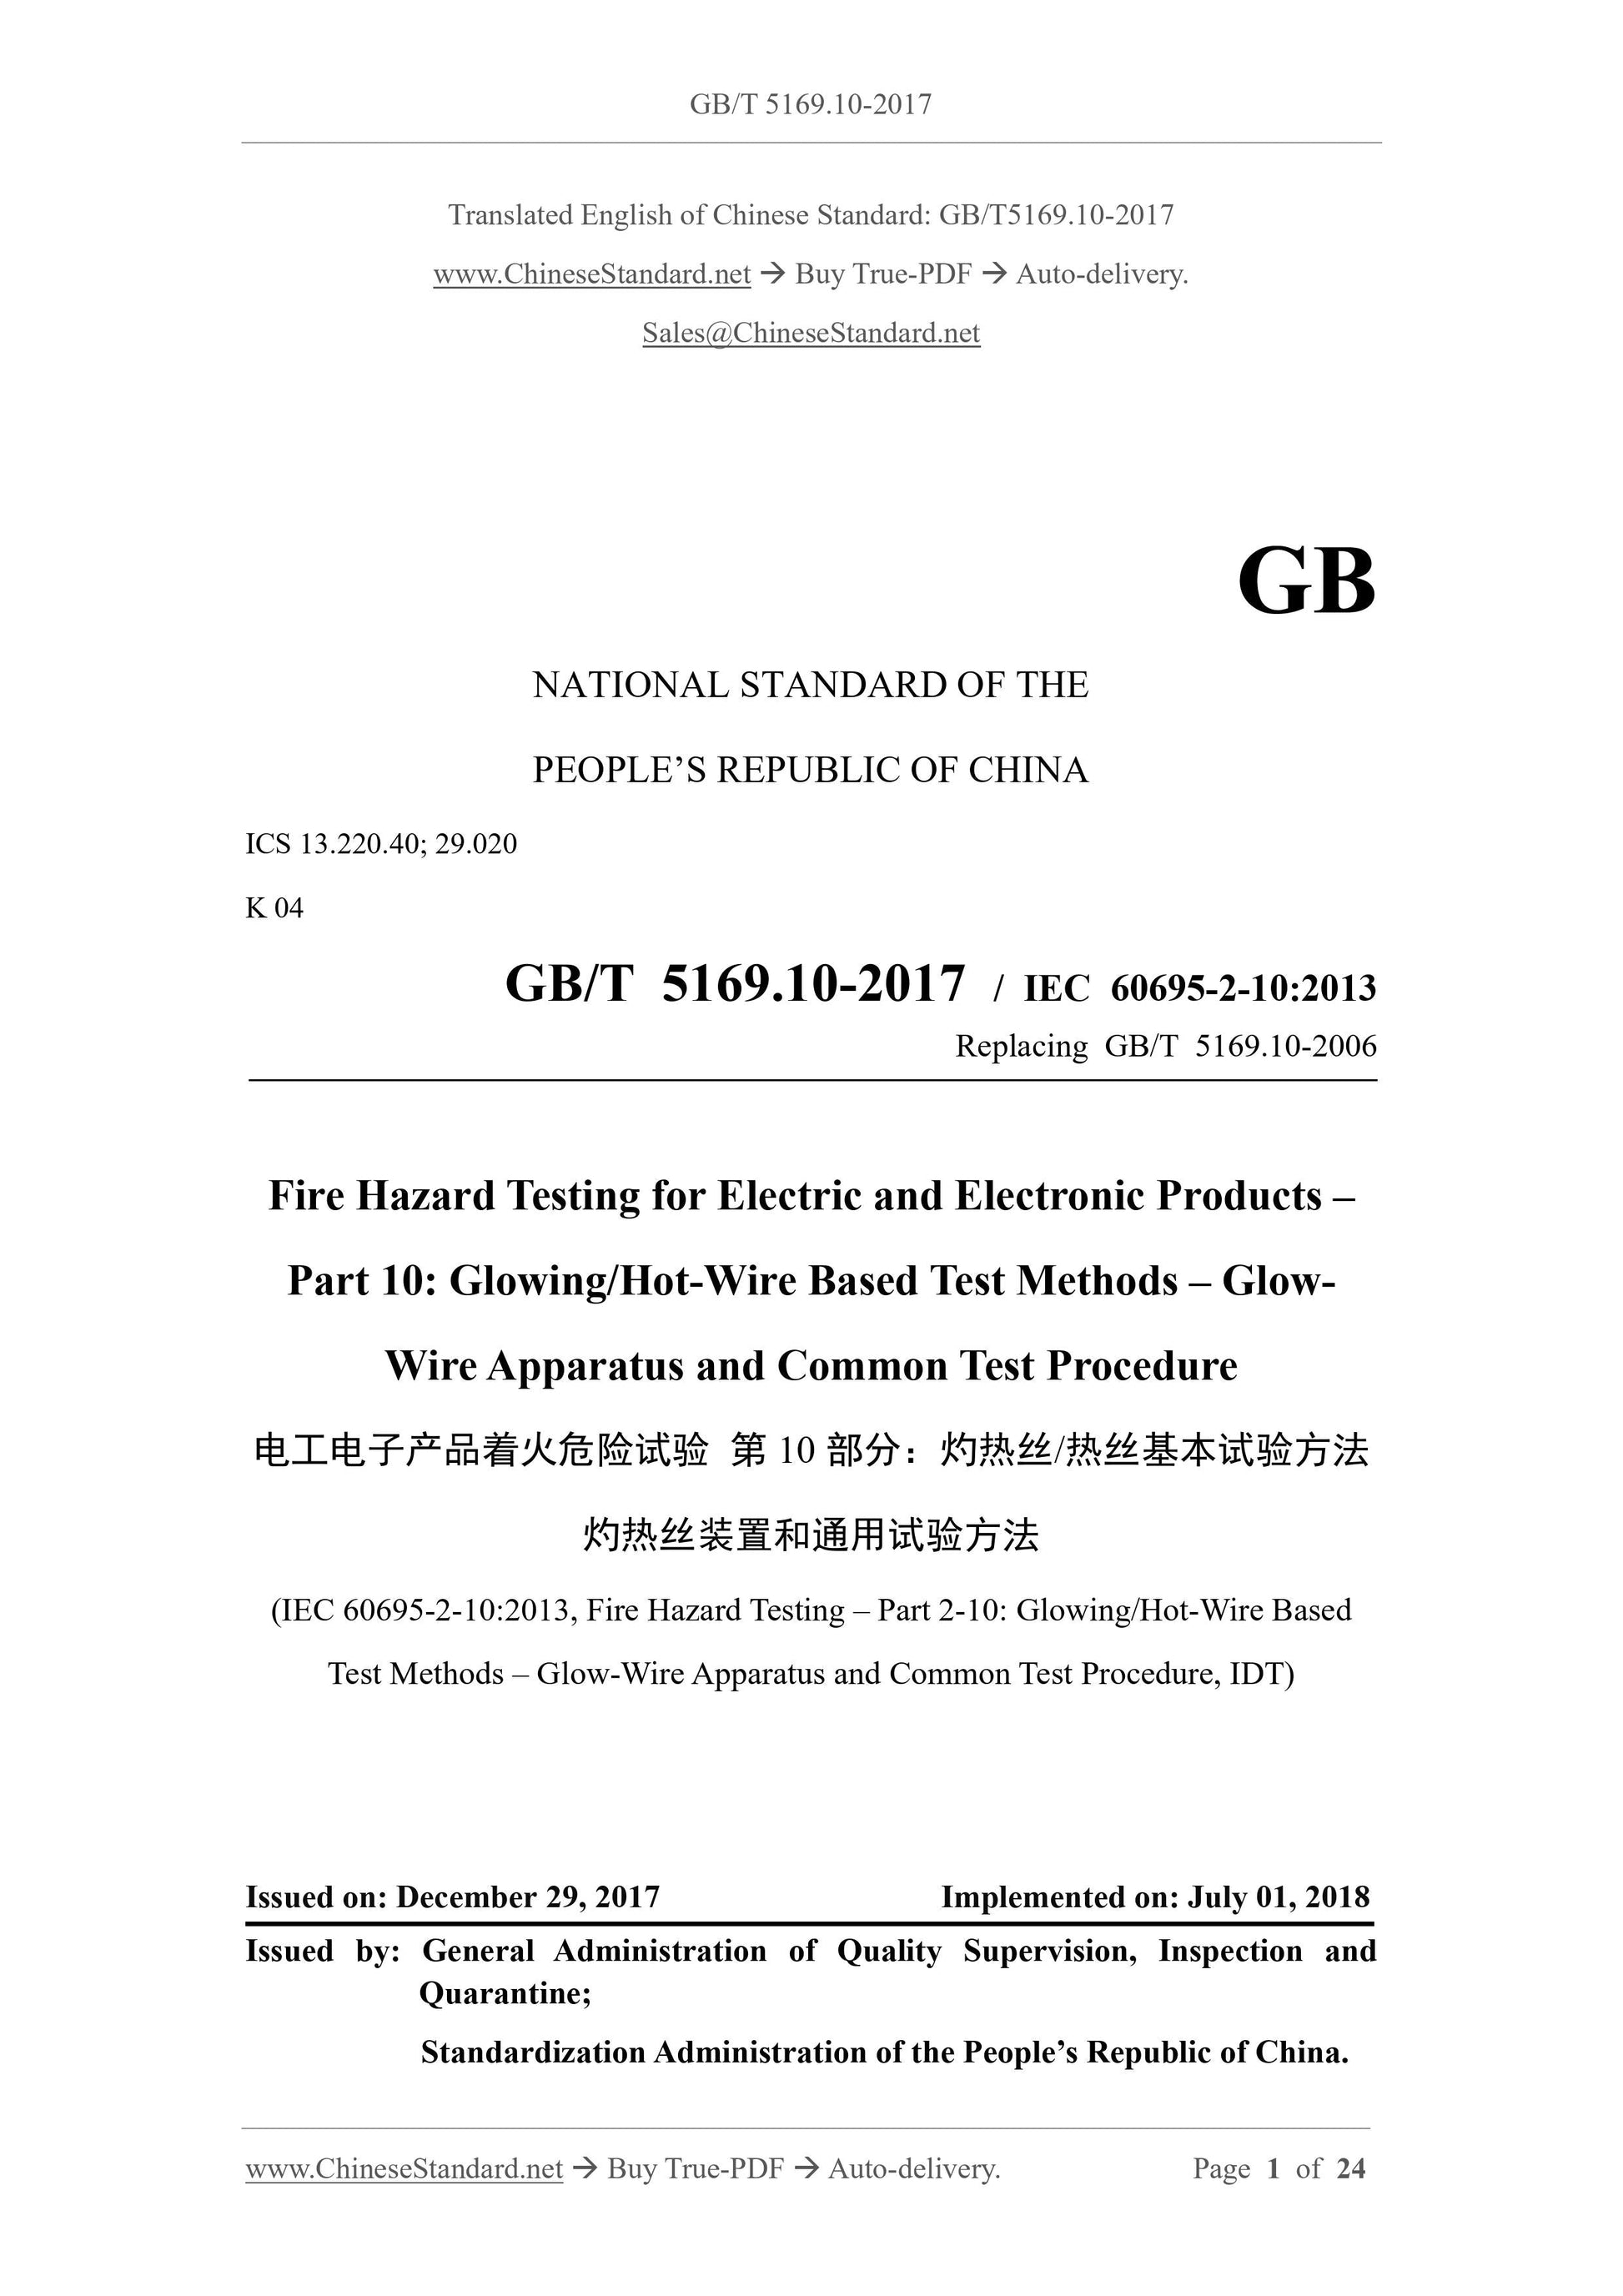 GB/T 5169.10-2017 Page 1